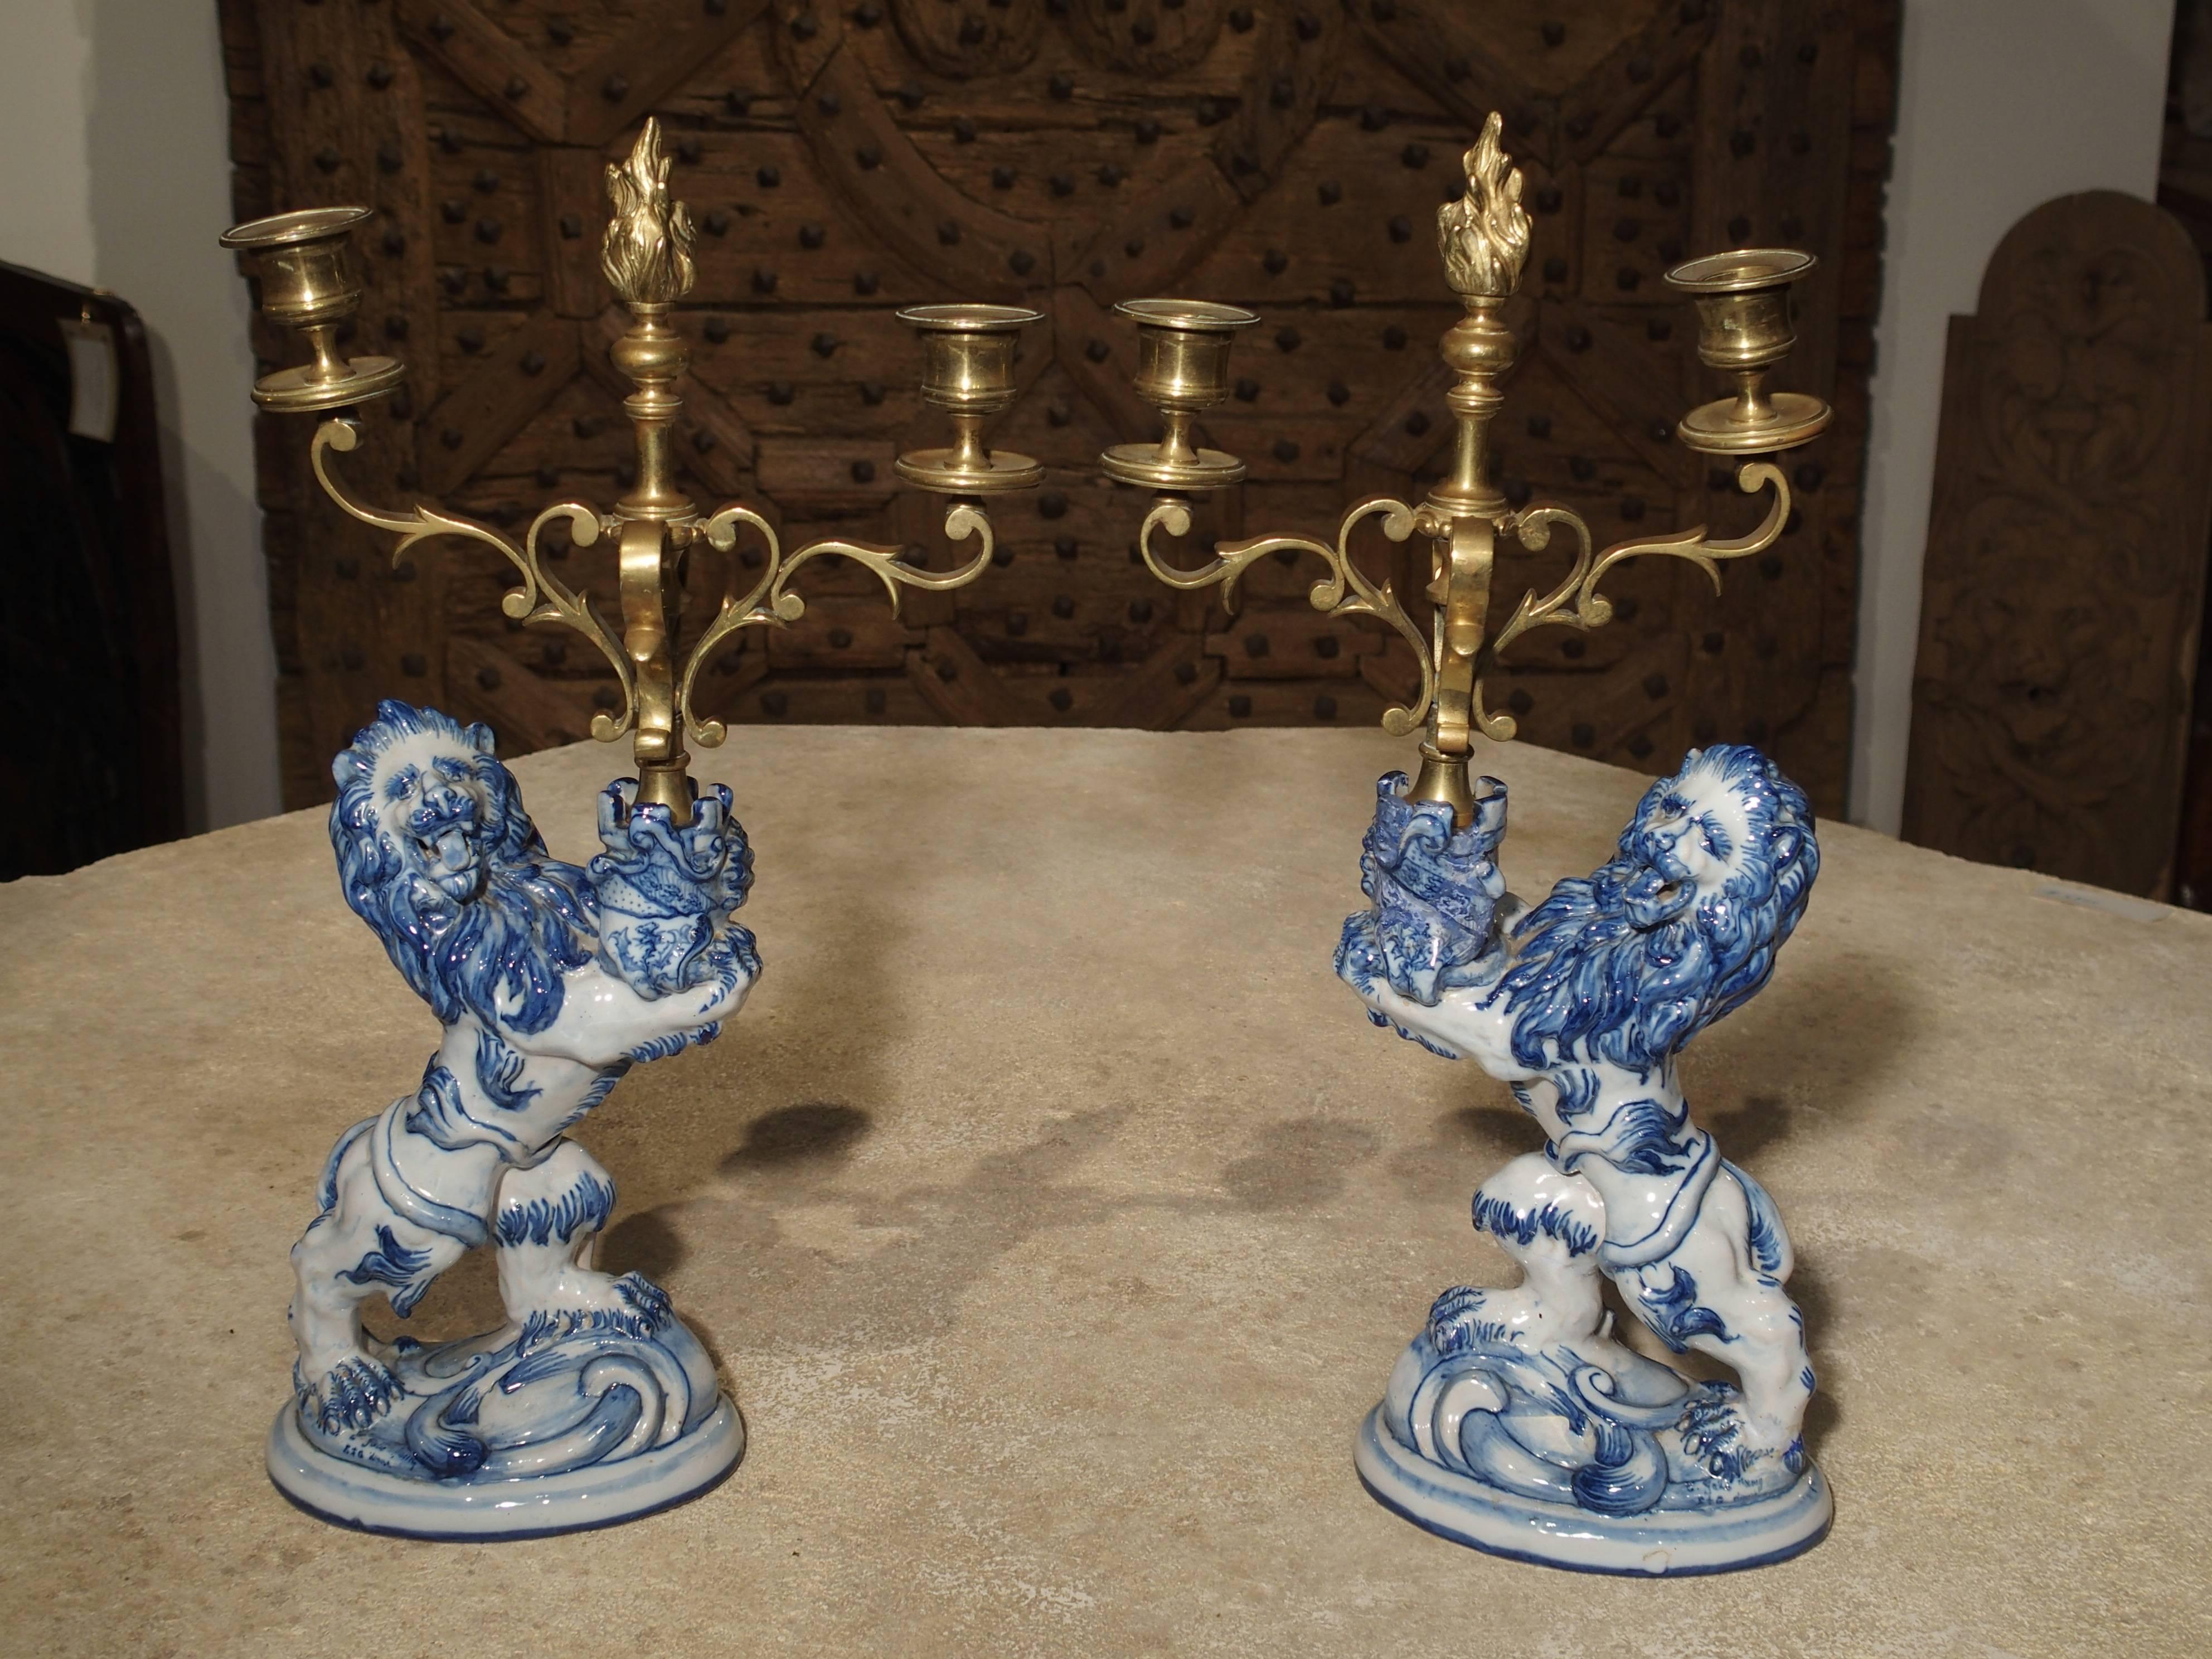 Pair of Late 1800s Emille Galle Faience Lion Candleholders from France 3